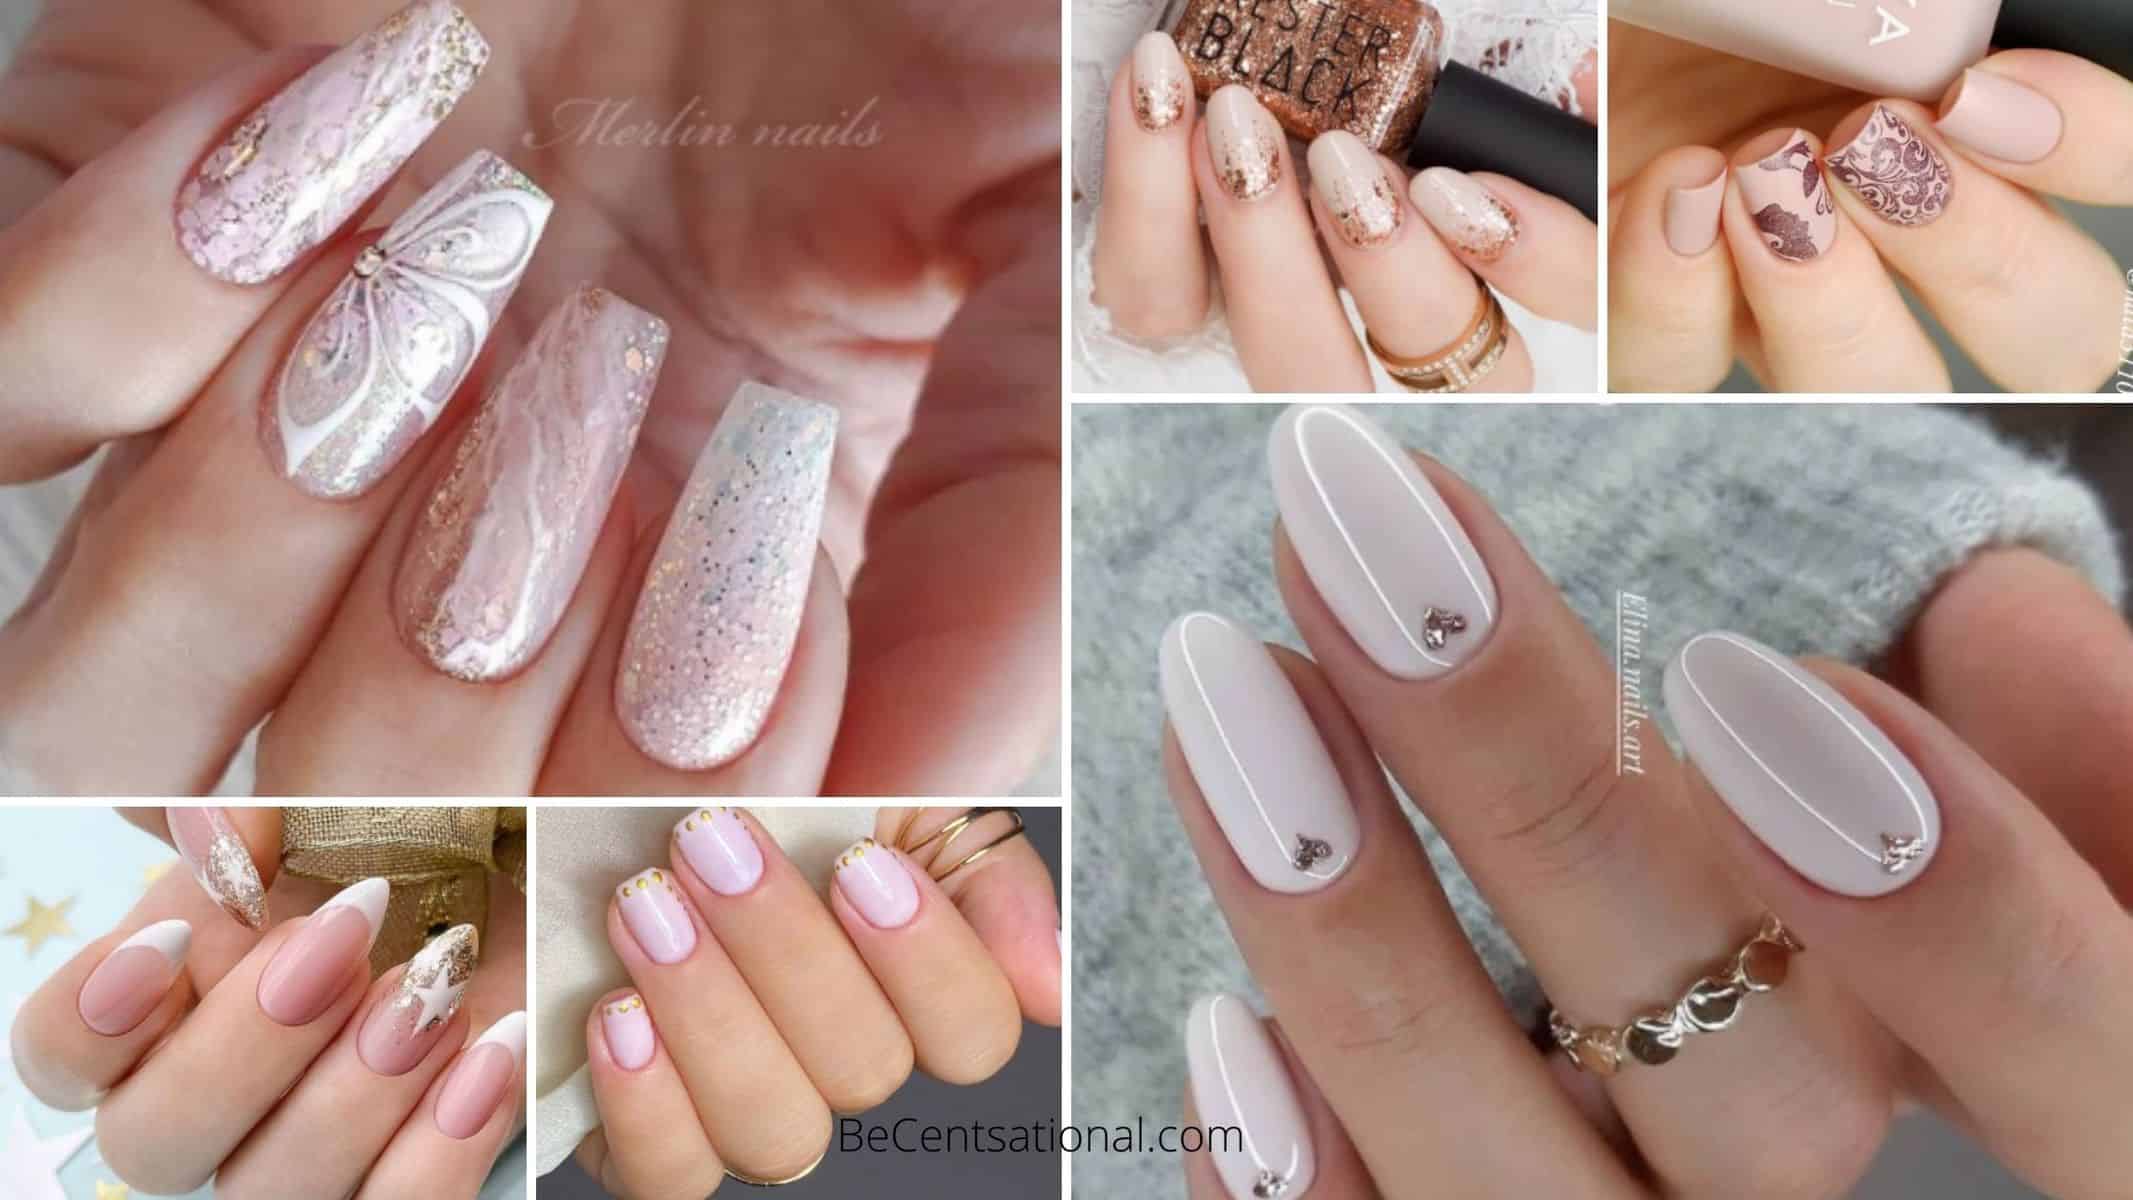 6. "Neutral Nail Colors for a Sophisticated Bridal Look" - wide 8